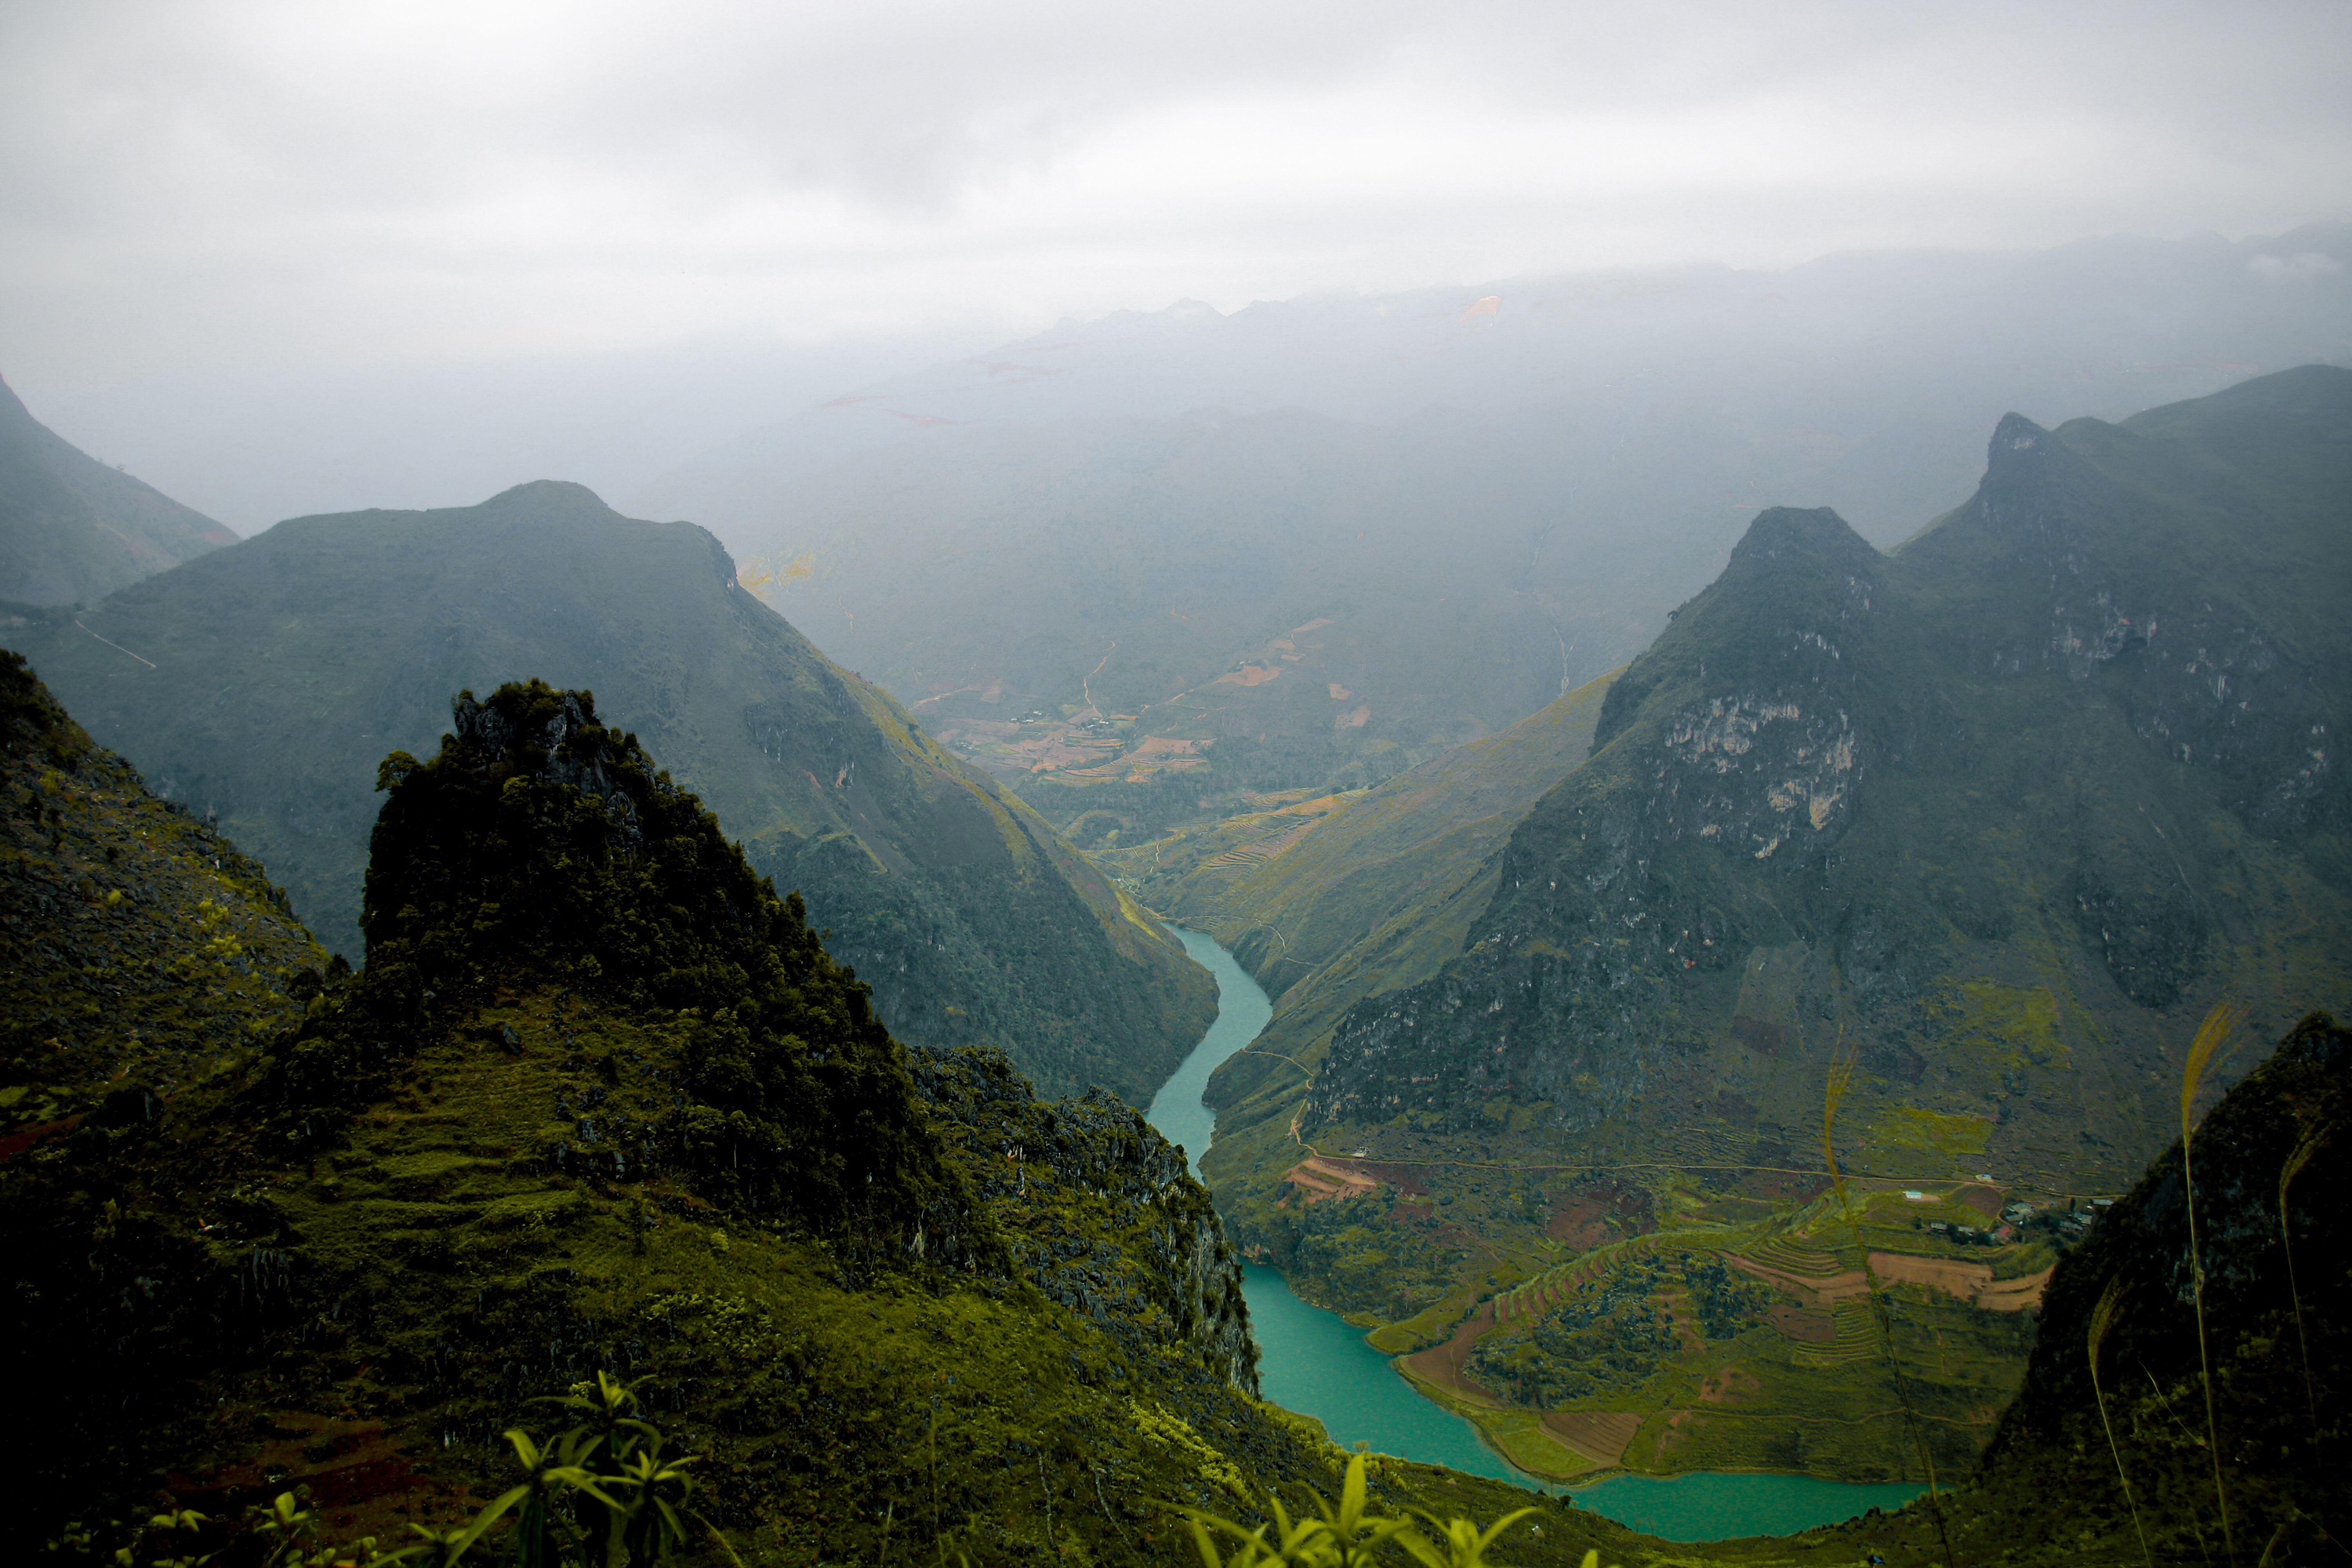 A karst mountain range as seen from the Ha giang Loop